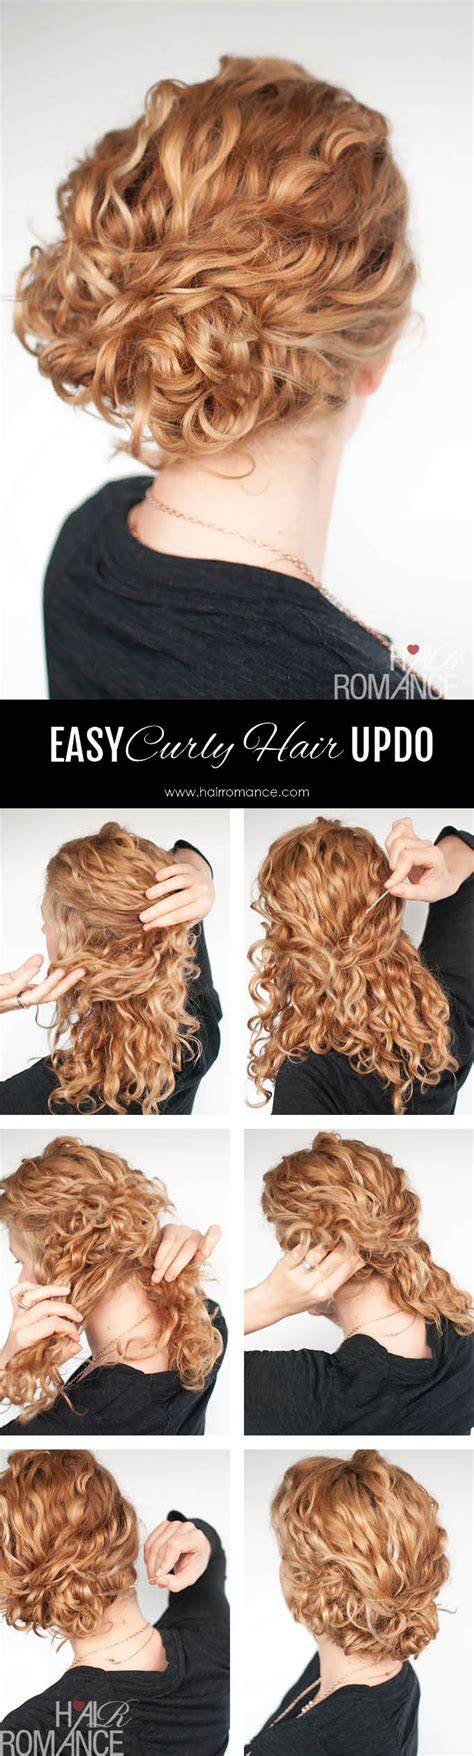 super easy updo hairstyle tutorial  curly hair hair romance